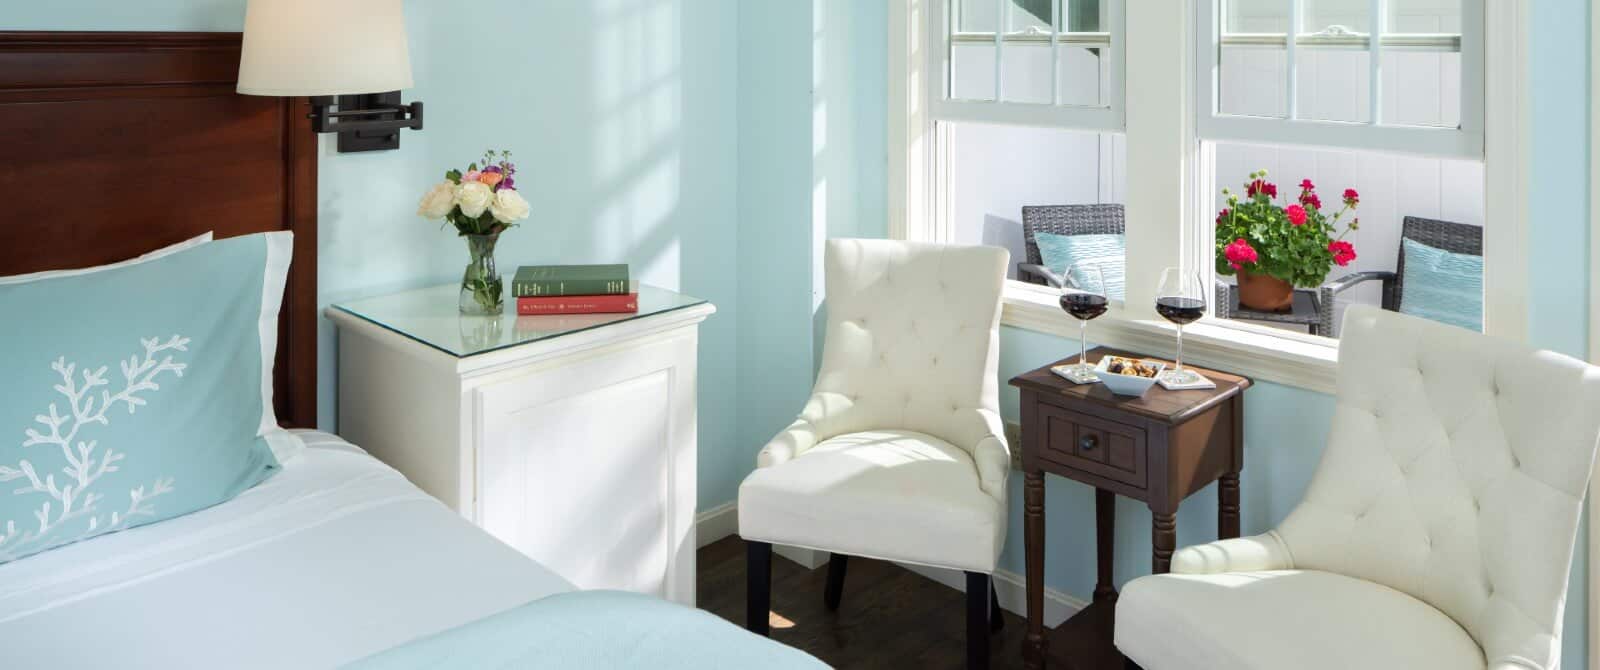 Bedroom with pale blue hues, white sitting chairs and window overlooking private patio